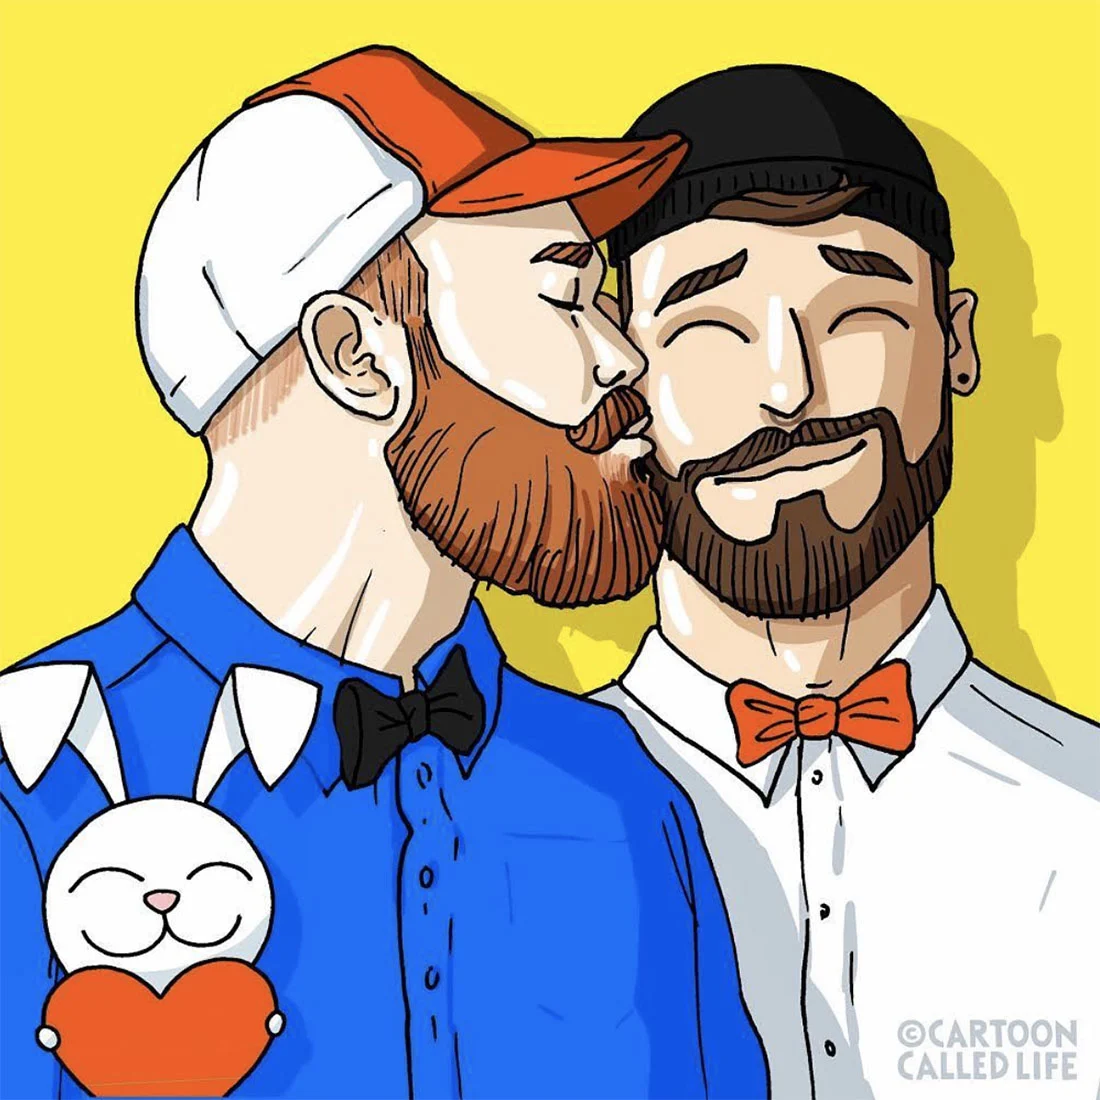 Bunny loves us! - Cartoon called life - Gay Artwork on Instagram: our favorite art pieces of Couple of Men